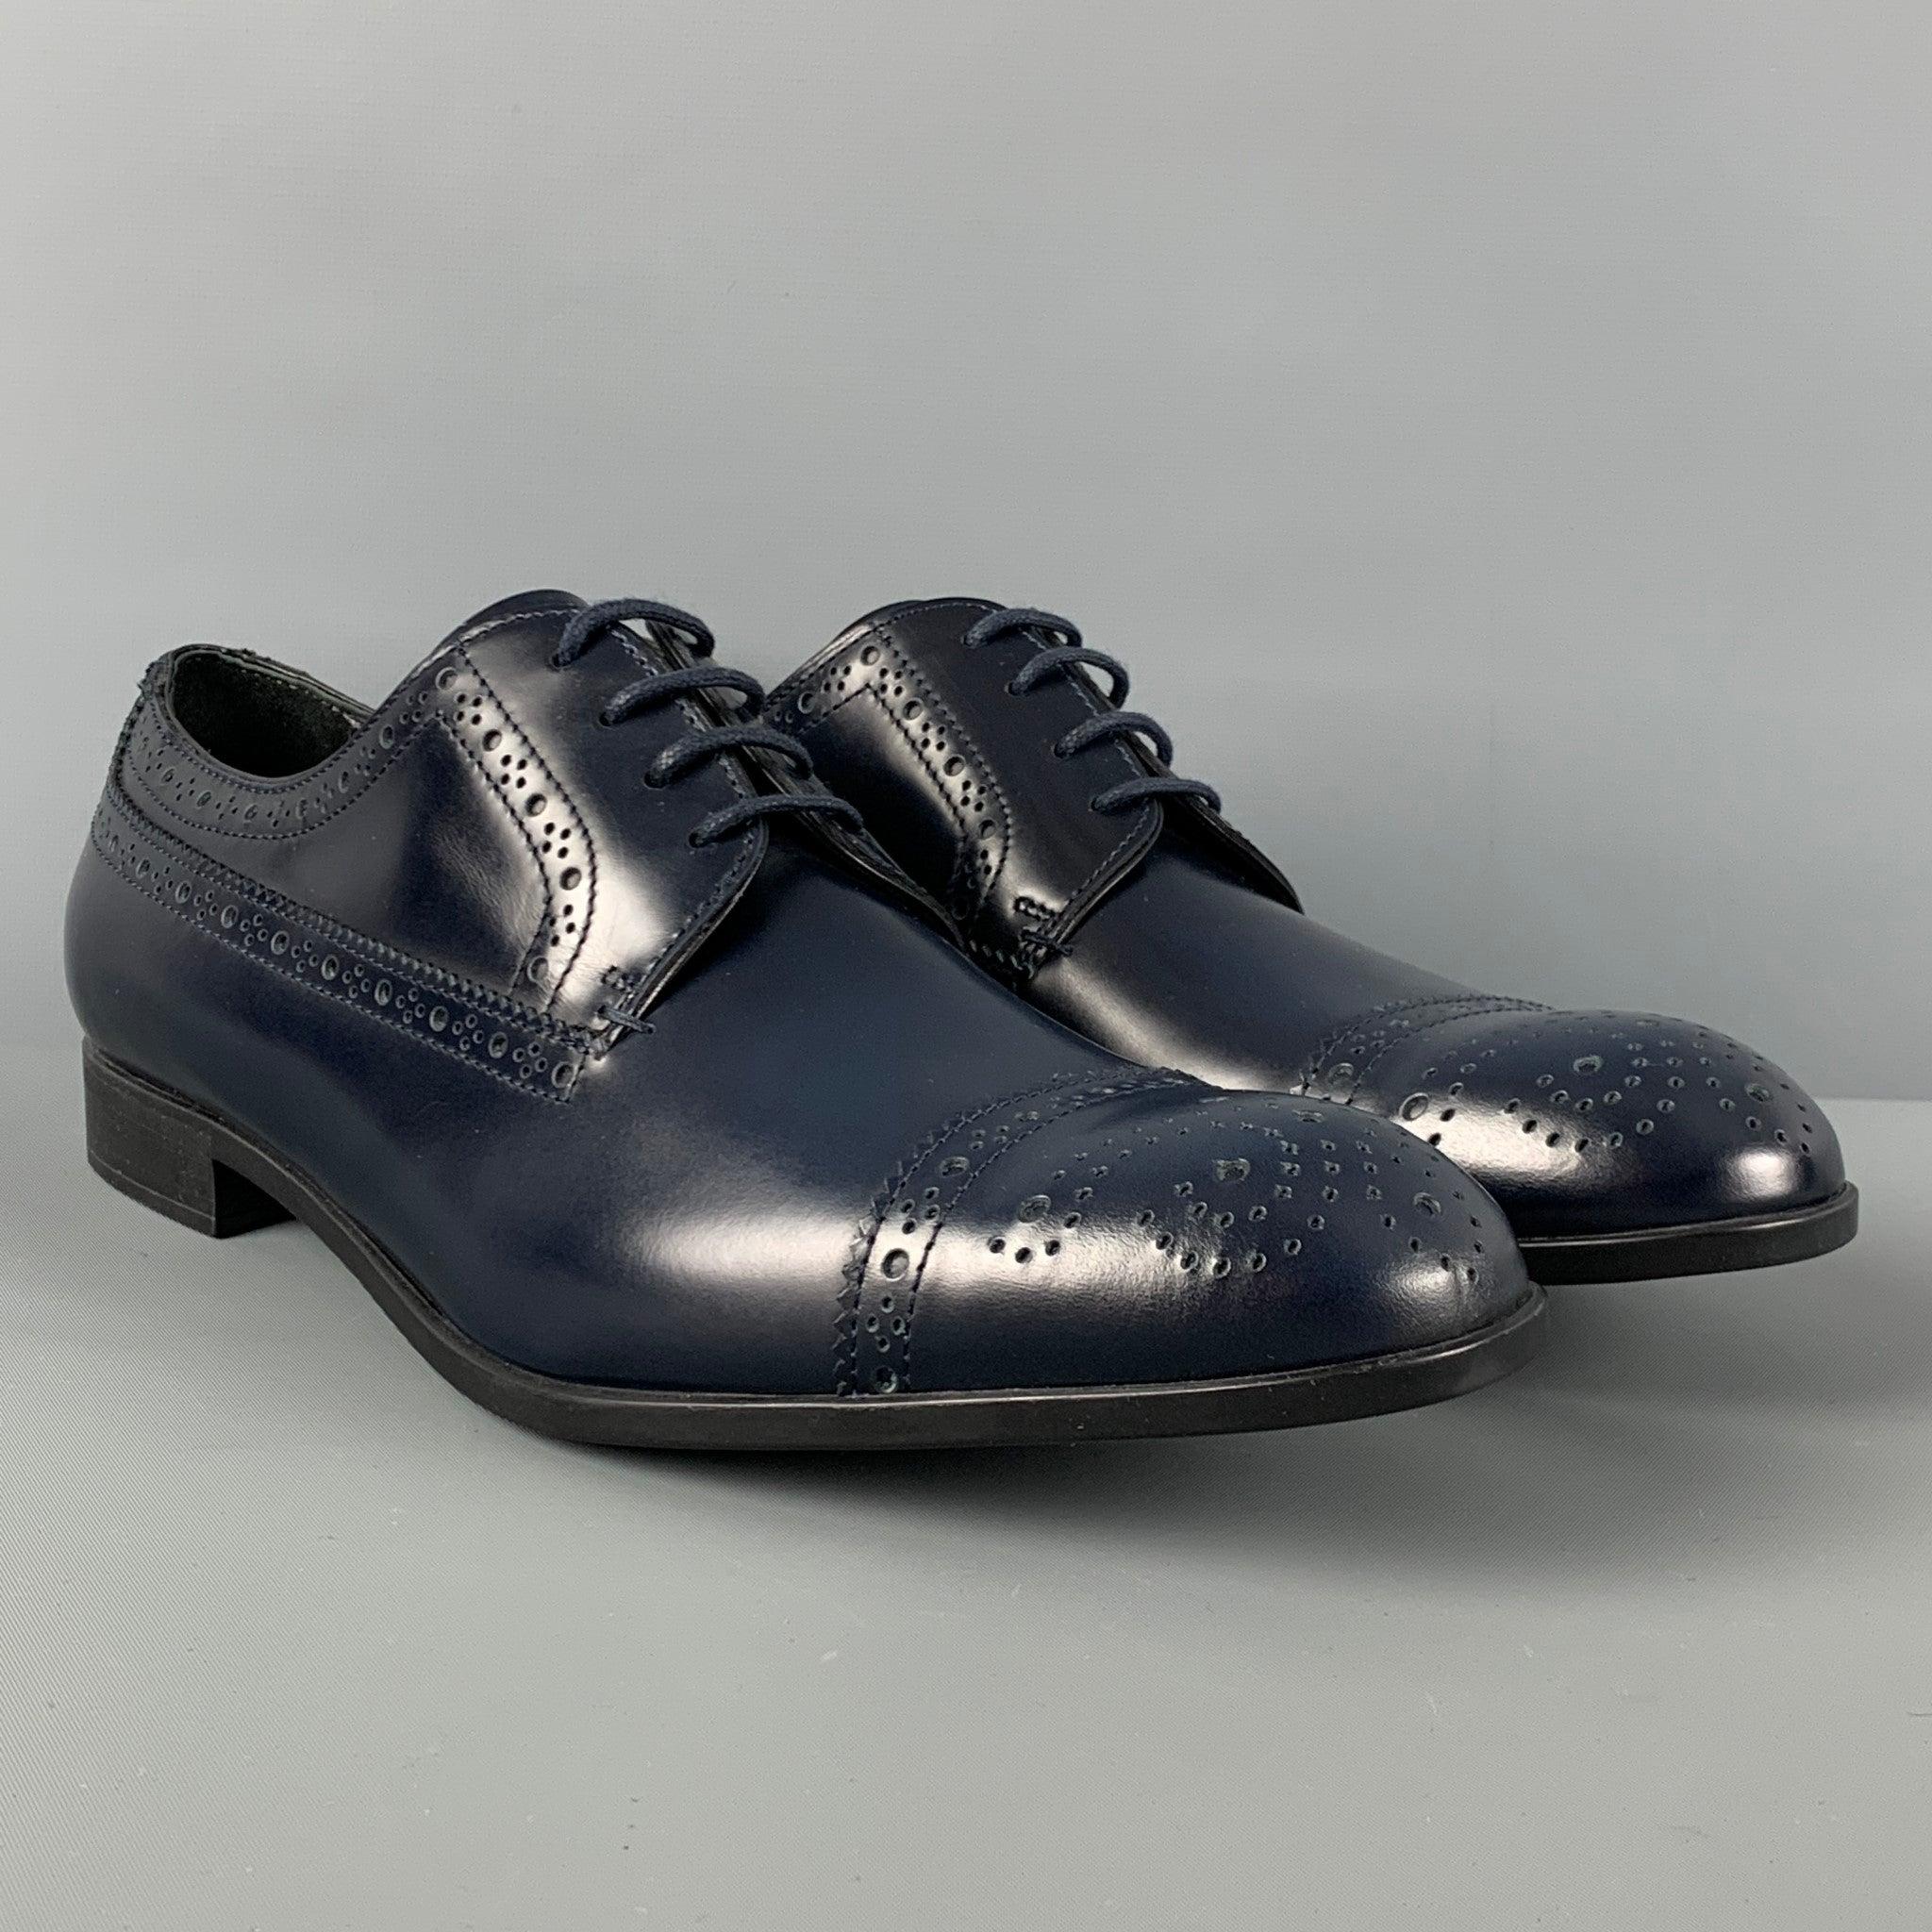 EMPORIO ARMANI shoes comes in a navy perforated leather featuring a cap toe and a lace up closure.
Excellent
Pre-Owned Condition. 

Marked:   8Outsole: 12 inches  x 4 inches 
  
  
 
Reference: 123278
Category: Lace Up Shoes
More Details
    
Brand: